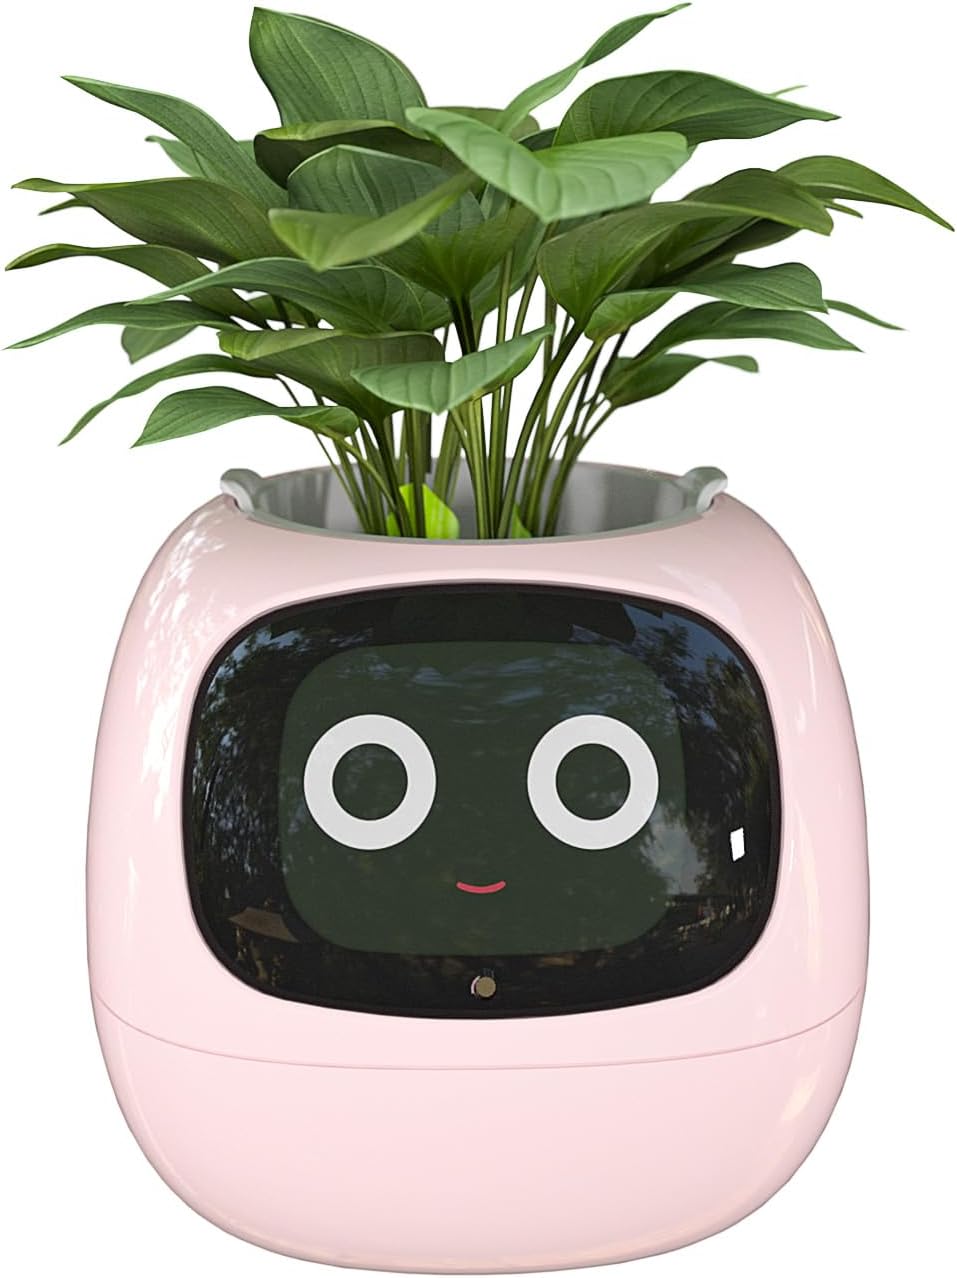 Smart Flowerpots, with Artificial Intelligence, Time Temperature Display, and Numerous Expressive Animations Based on the Environment, for Indoor Decoration, Gifts(Green)